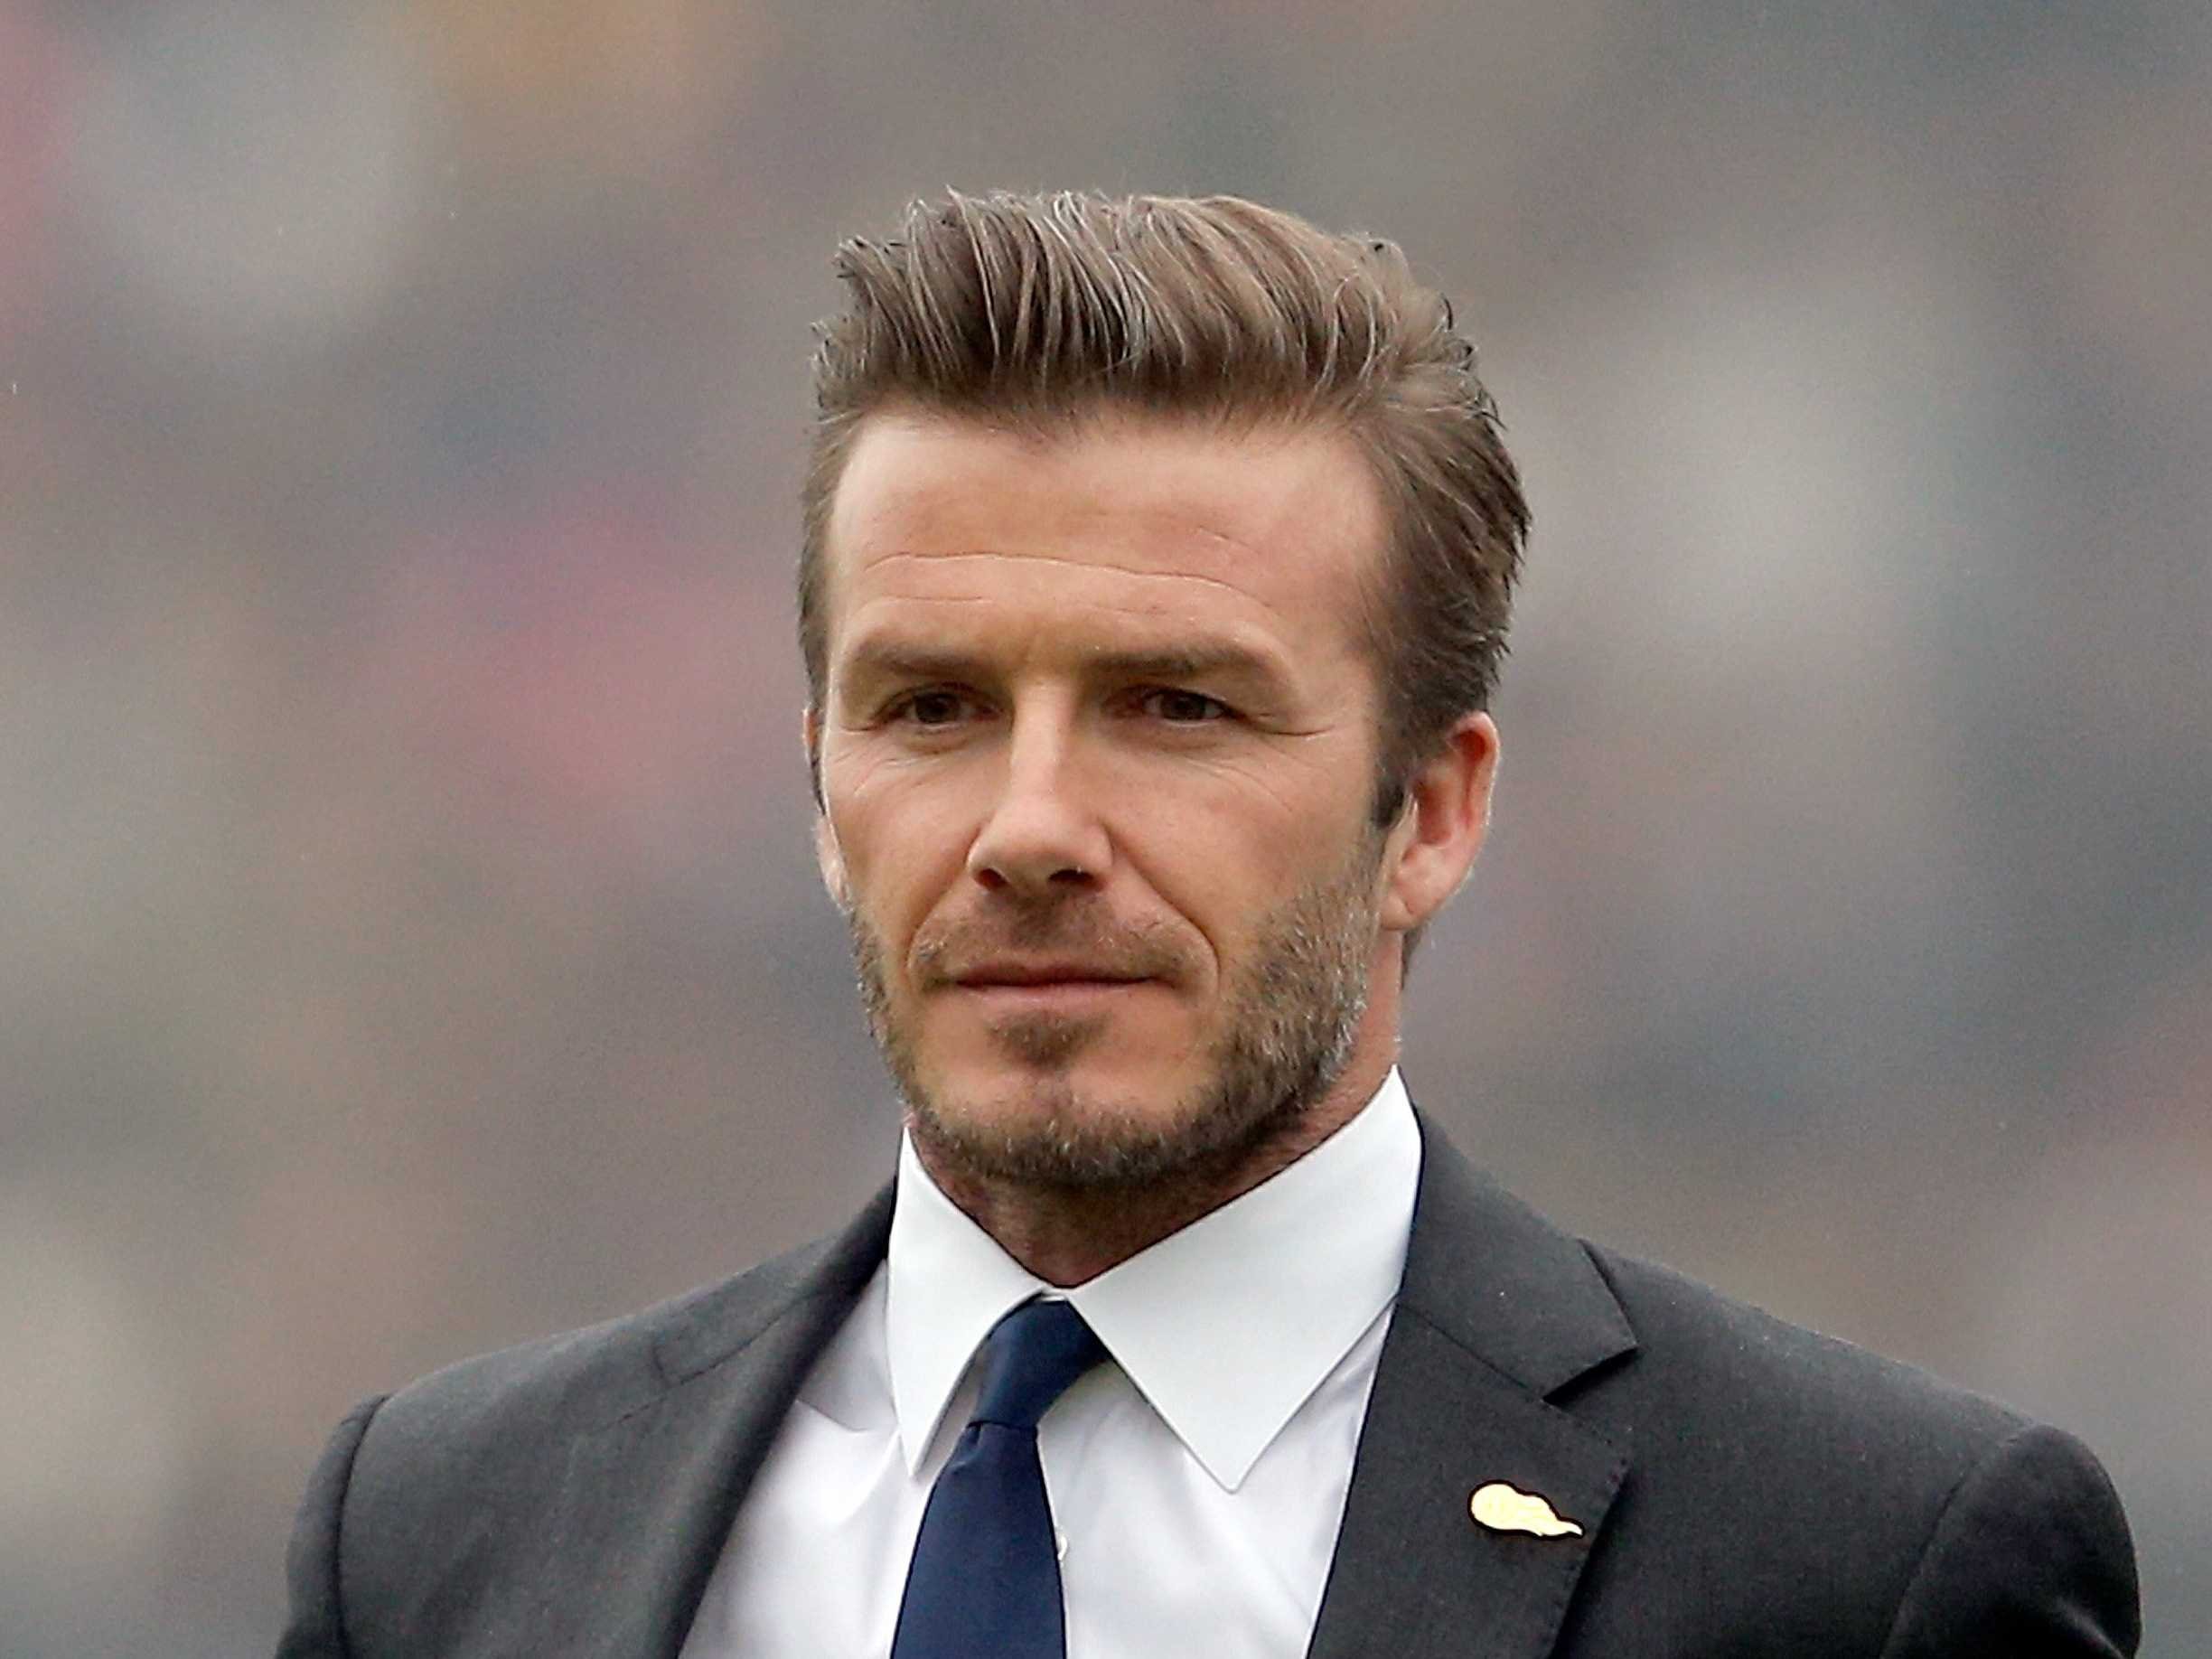 The Top 10 Most Handsome Football Players of 2014